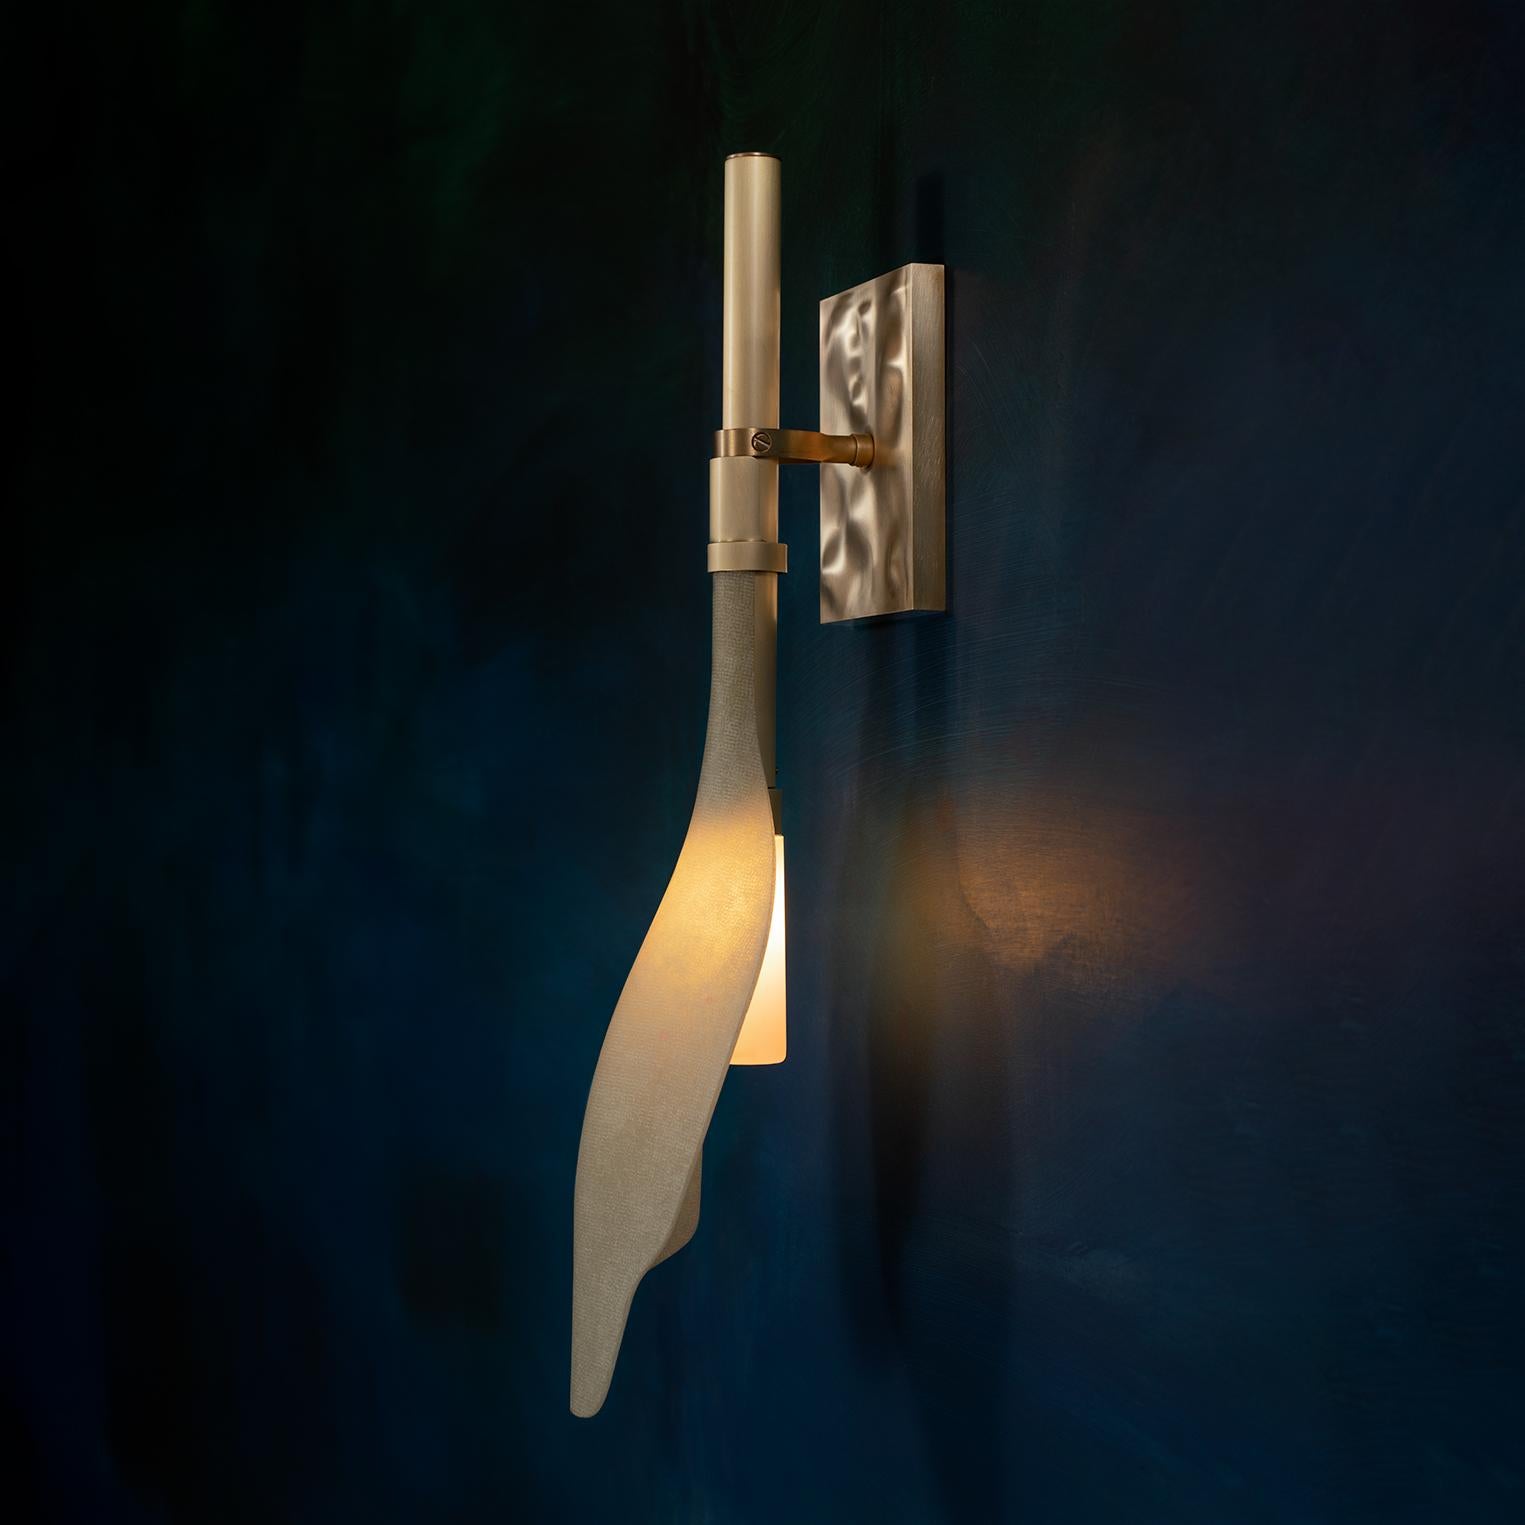 The Malcolm sconce is part of Andrea Claire’s Pisces collection, which is inspired by the mesmerizing movement of glowing kelp blades in sunlit waters. 

This carefully crafted piece illuminates and draws us into memories of the beach and rhythms